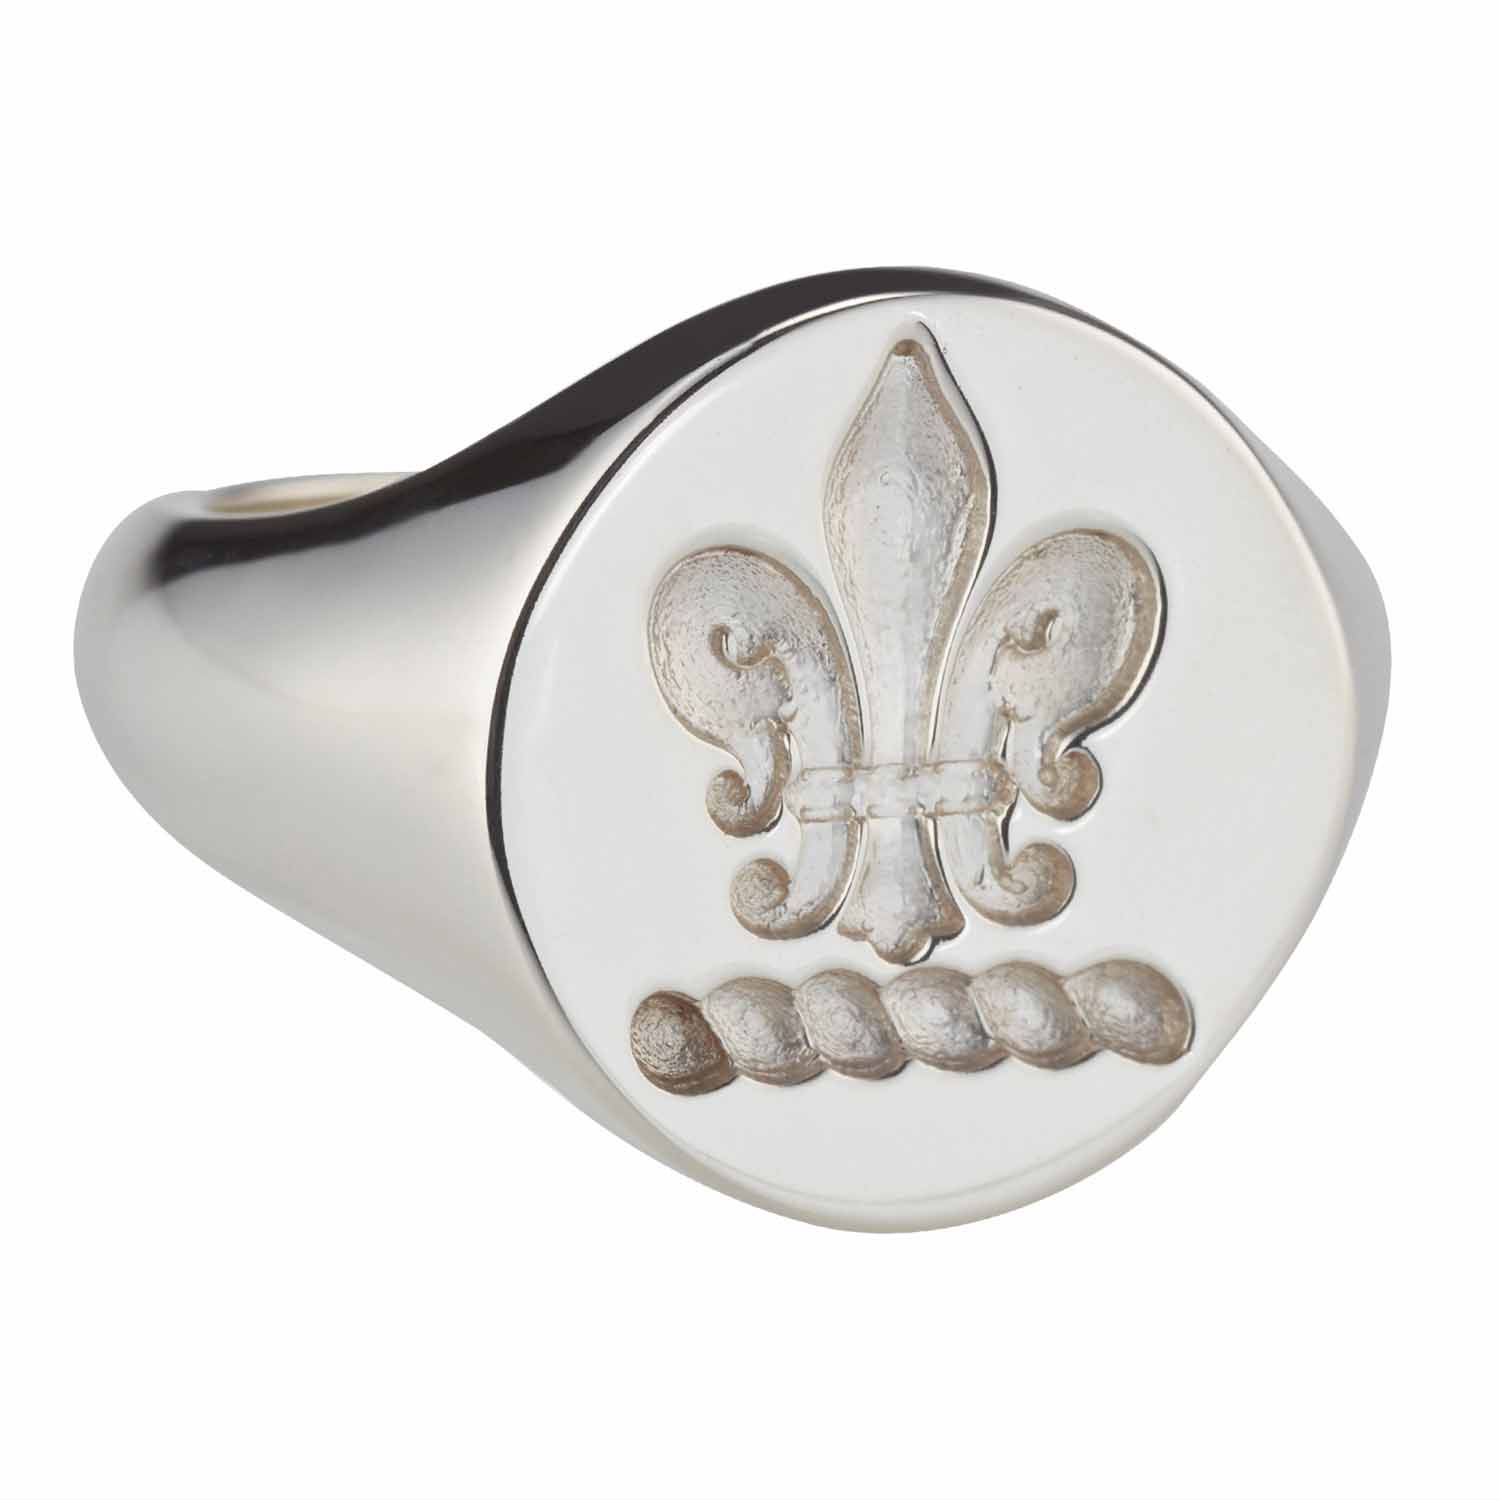 Product image for Irish Rings - Sterling Silver Family Crest Ring and Wax Seal